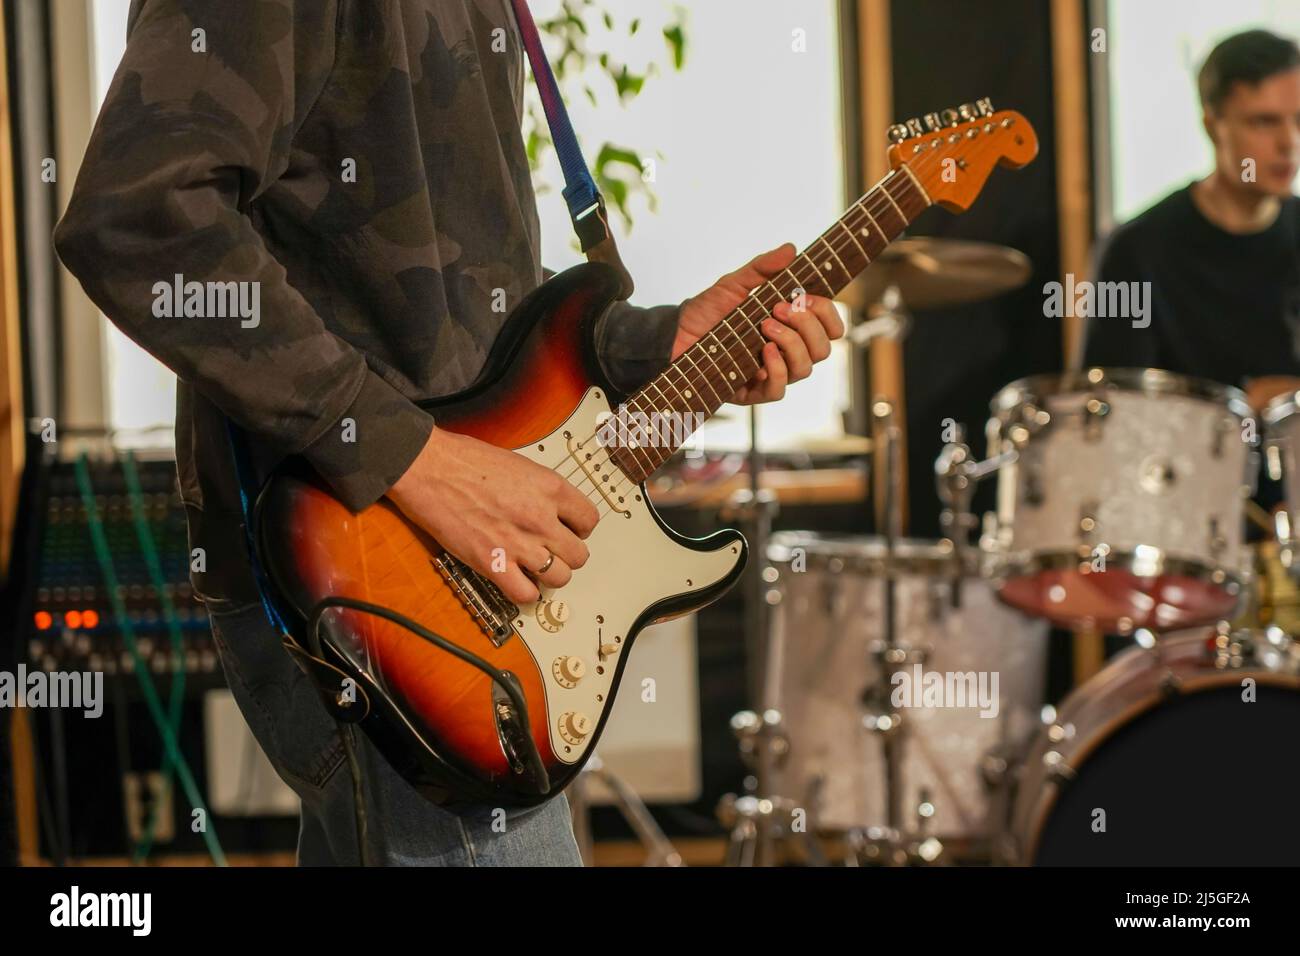 The guy plays the electric guitar to record the sound. He holds a guitar in his hands Stock Photo